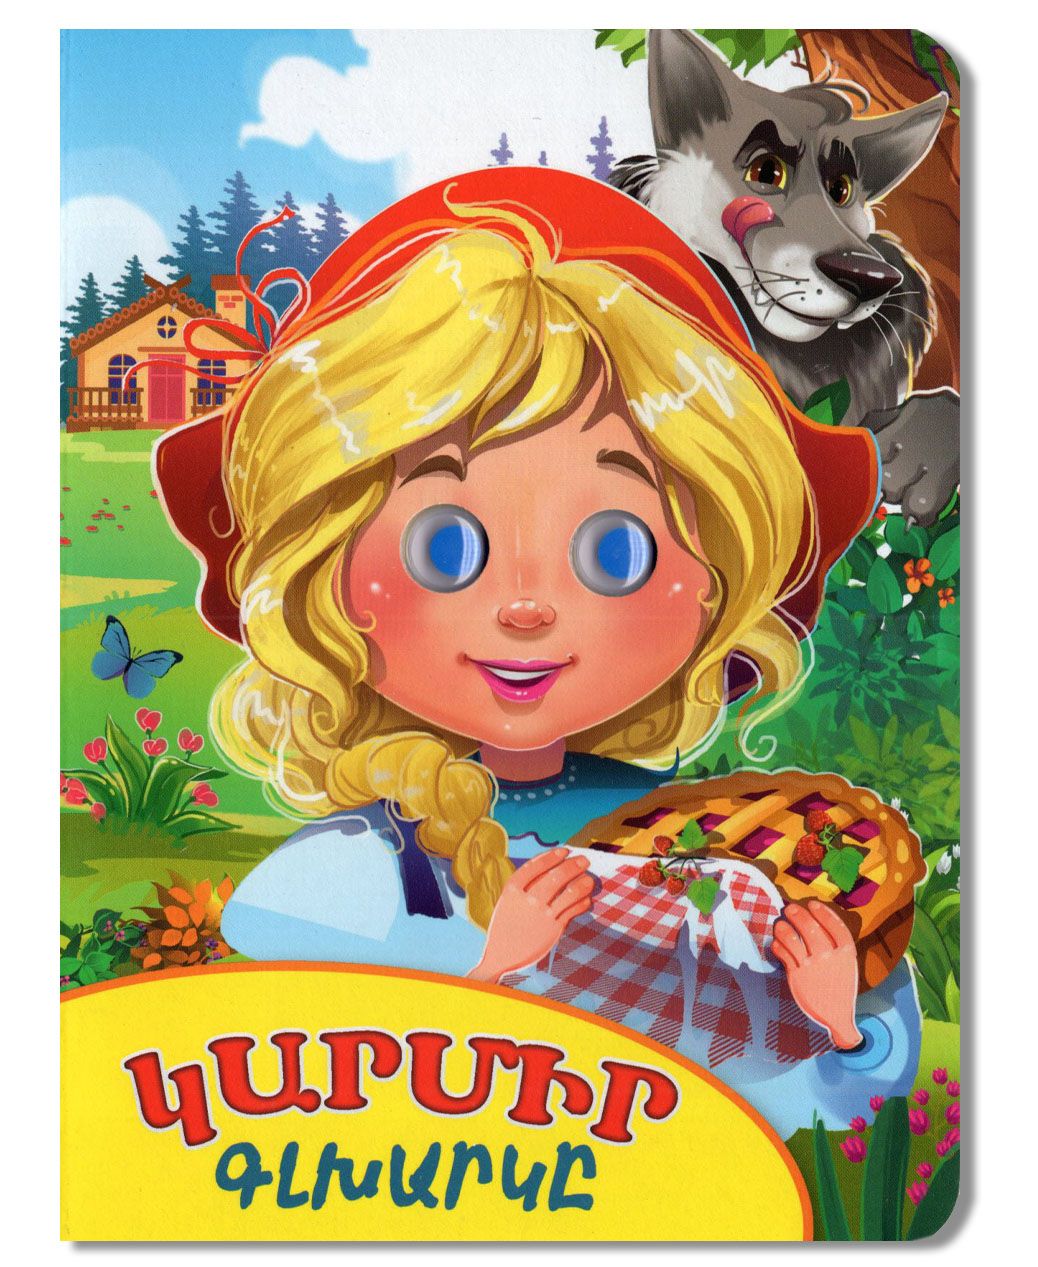 Little Red Riding Hood (board book)